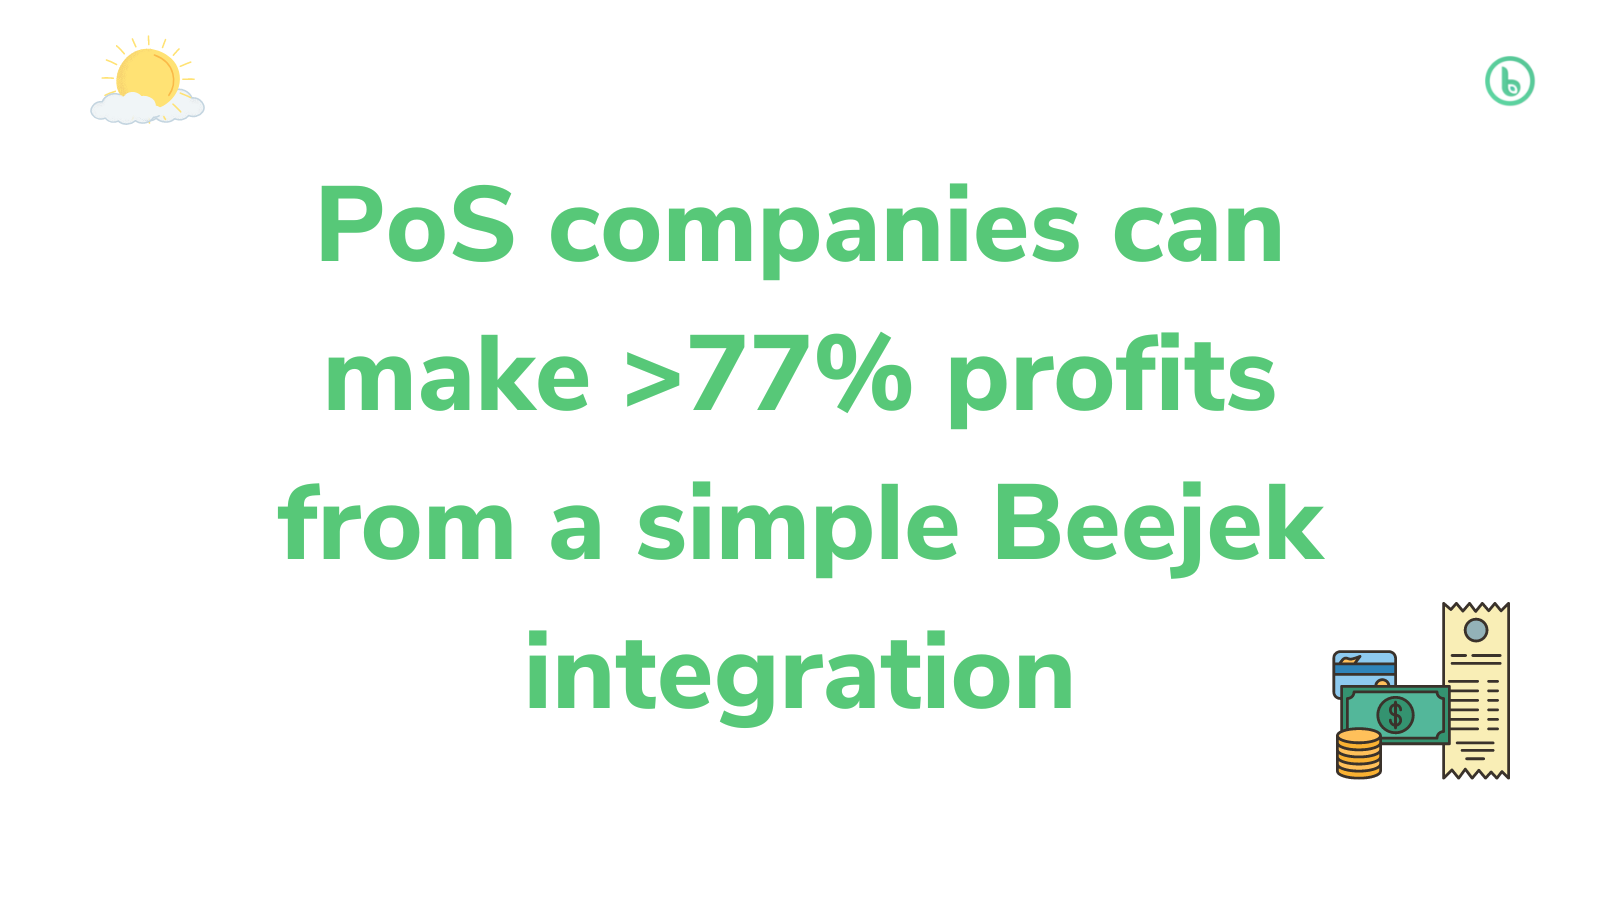 PoS companies can make >77% profits from a simple Beejek integration